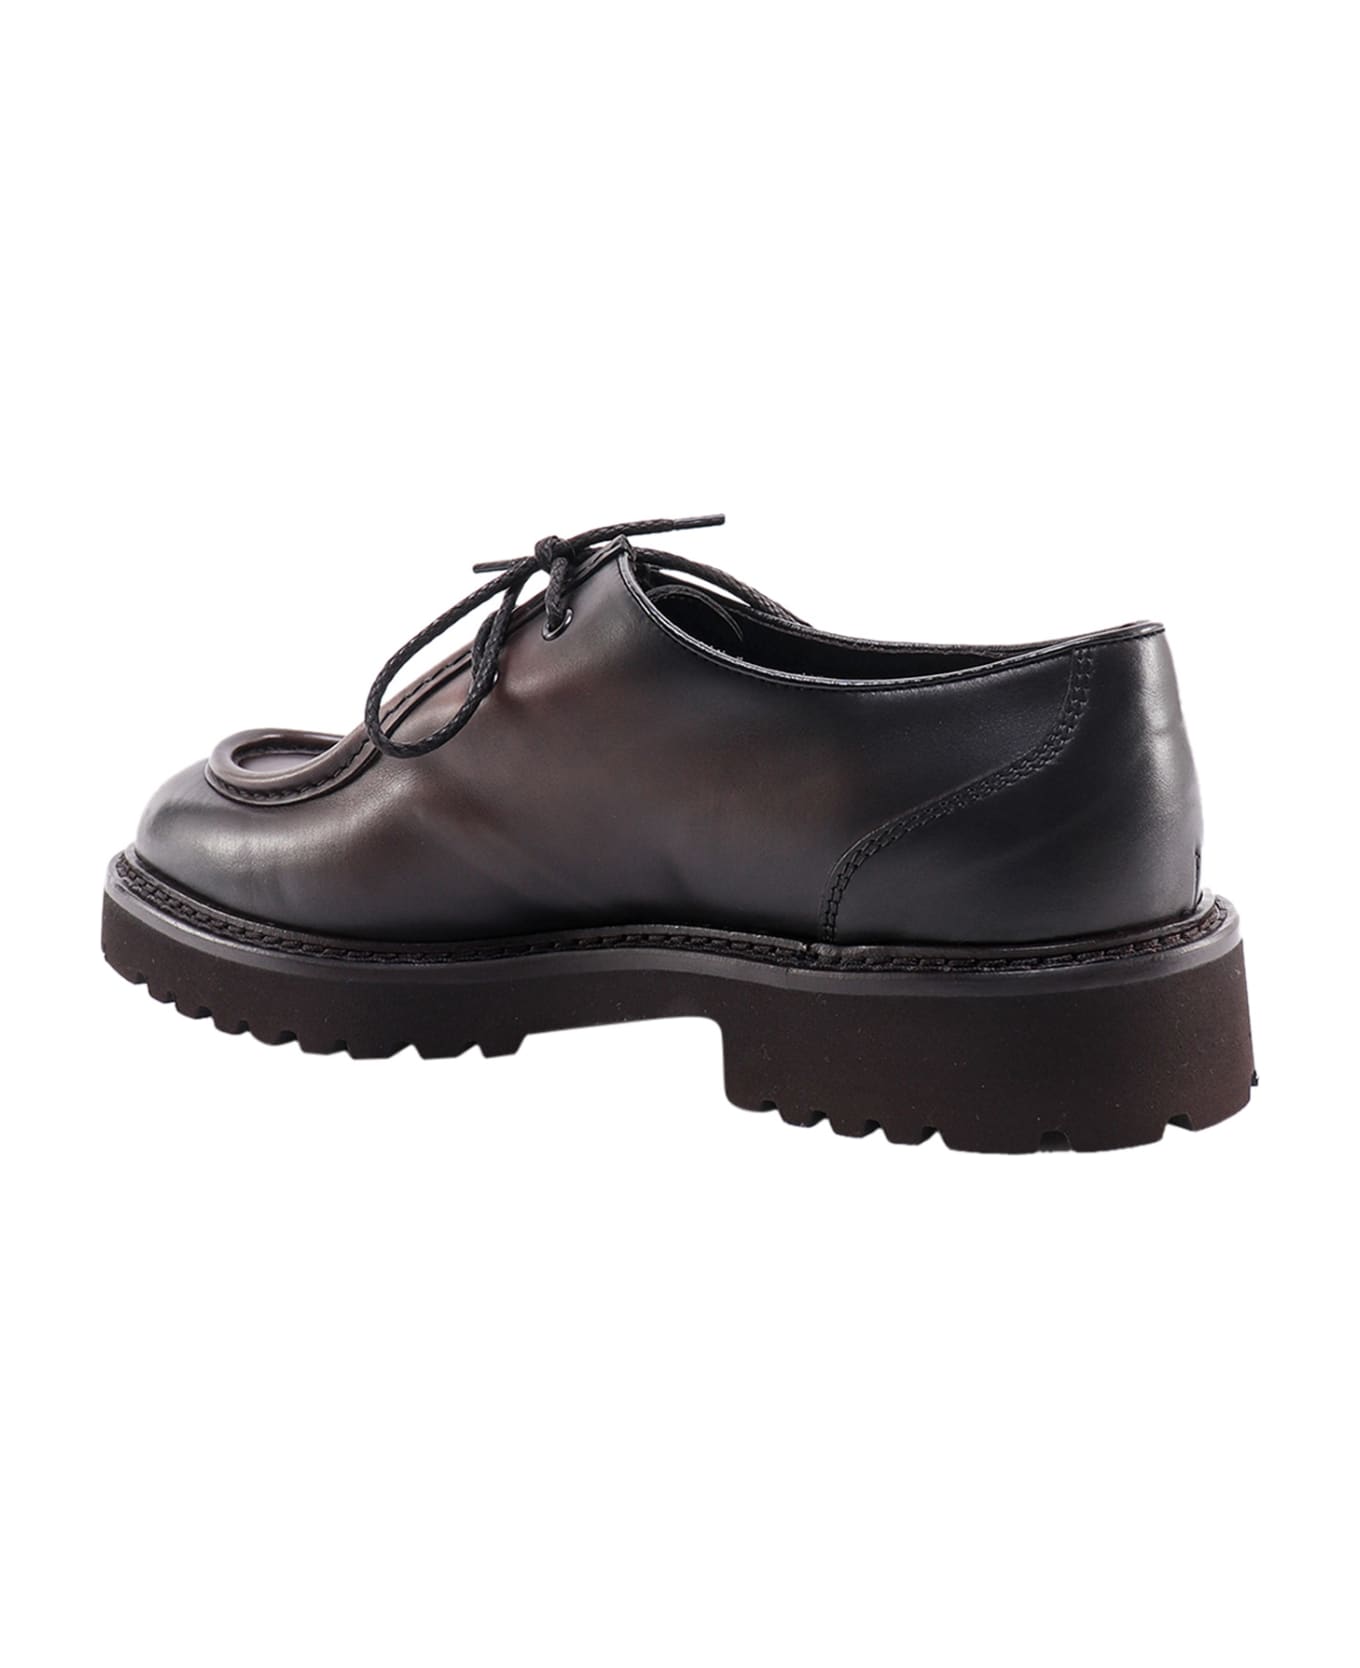 Doucal's Lace-up Shoe - Moro